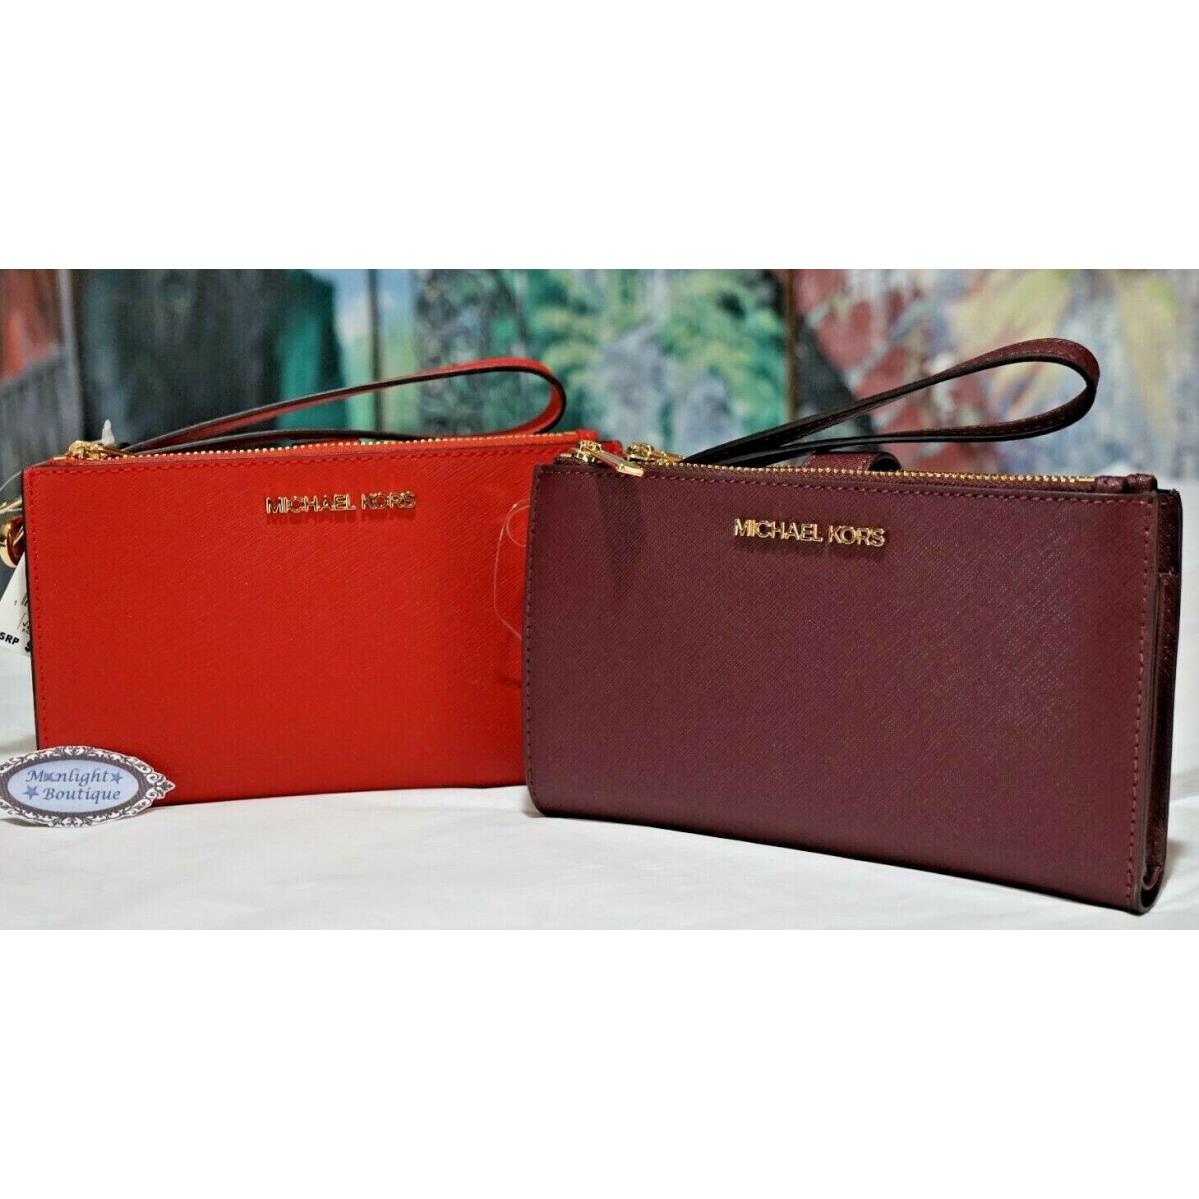 Michael Kors wallet  - Select Your Color: Merlot or Flame 2